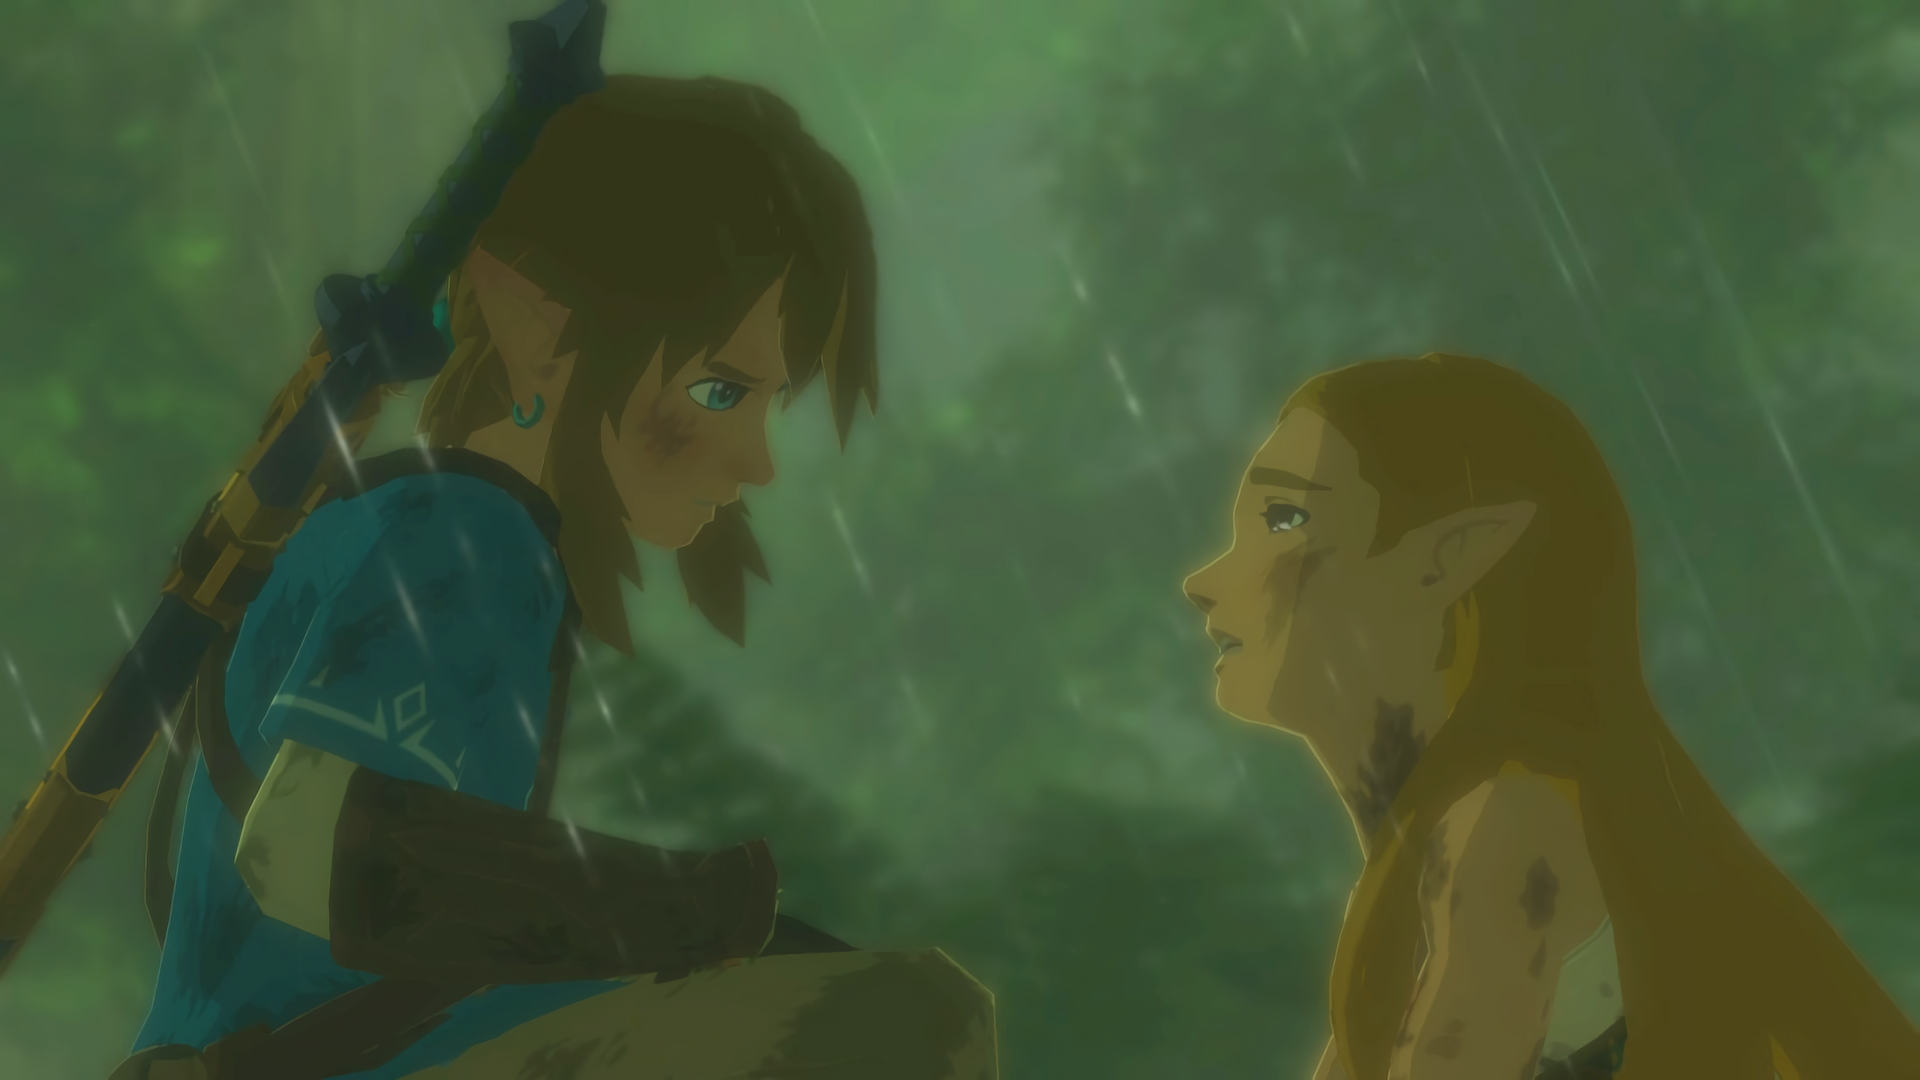 General 1920x1080 The Legend of Zelda: Breath of the Wild Link Zelda Breath of the Wild screen shot anime boys anime girls